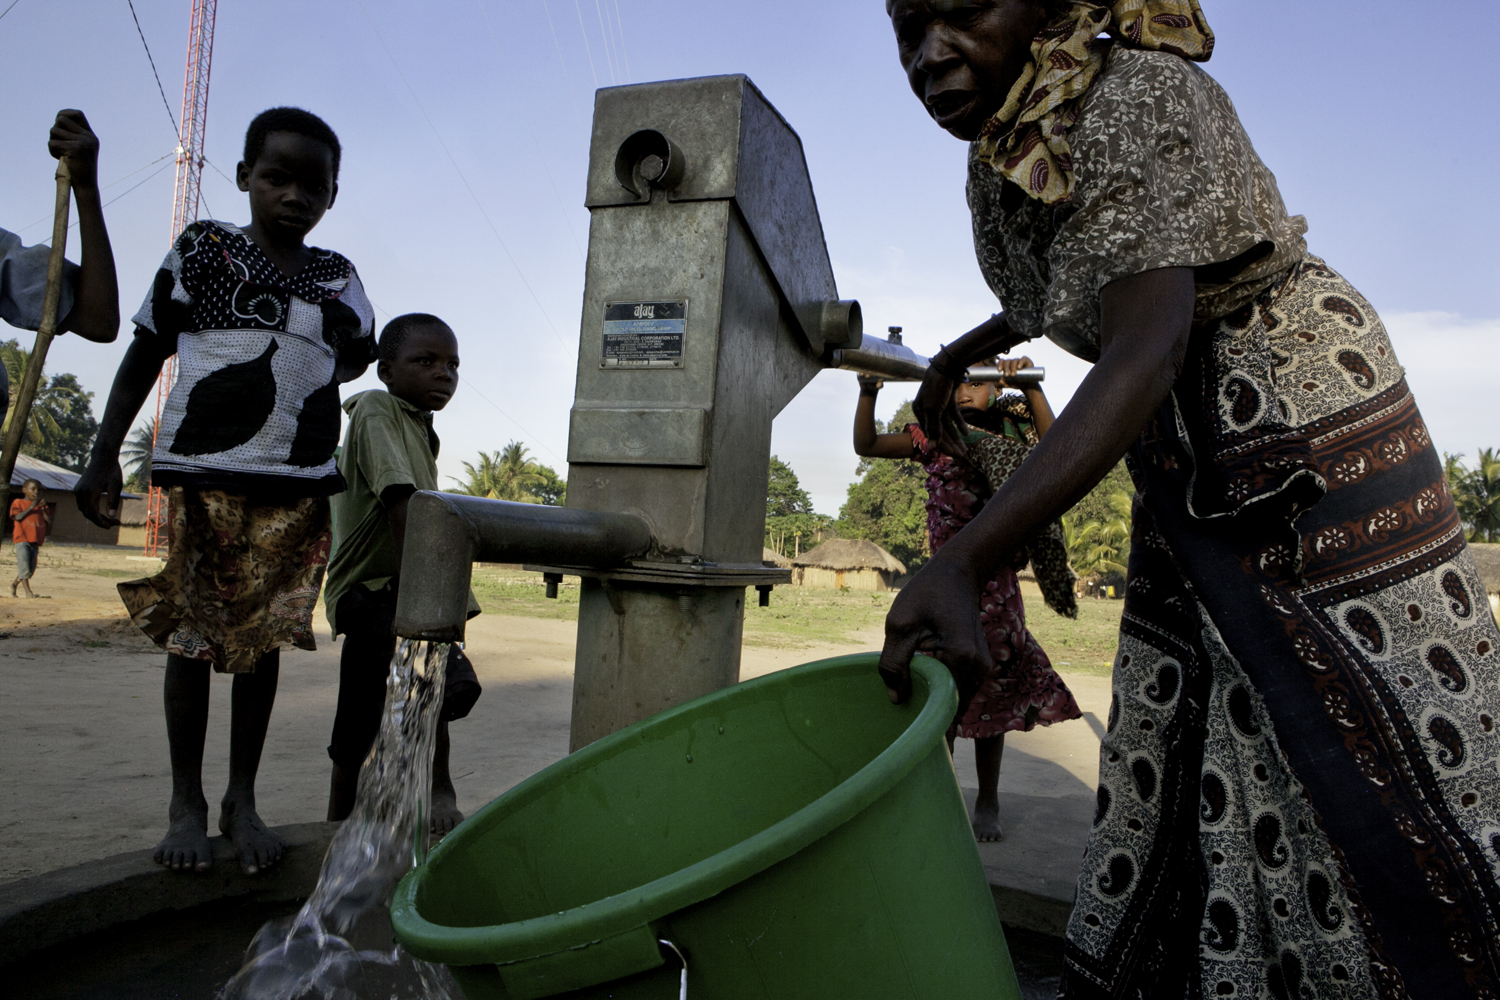  After well rehab is successful, people of all ages utilize the pump to gather water. 